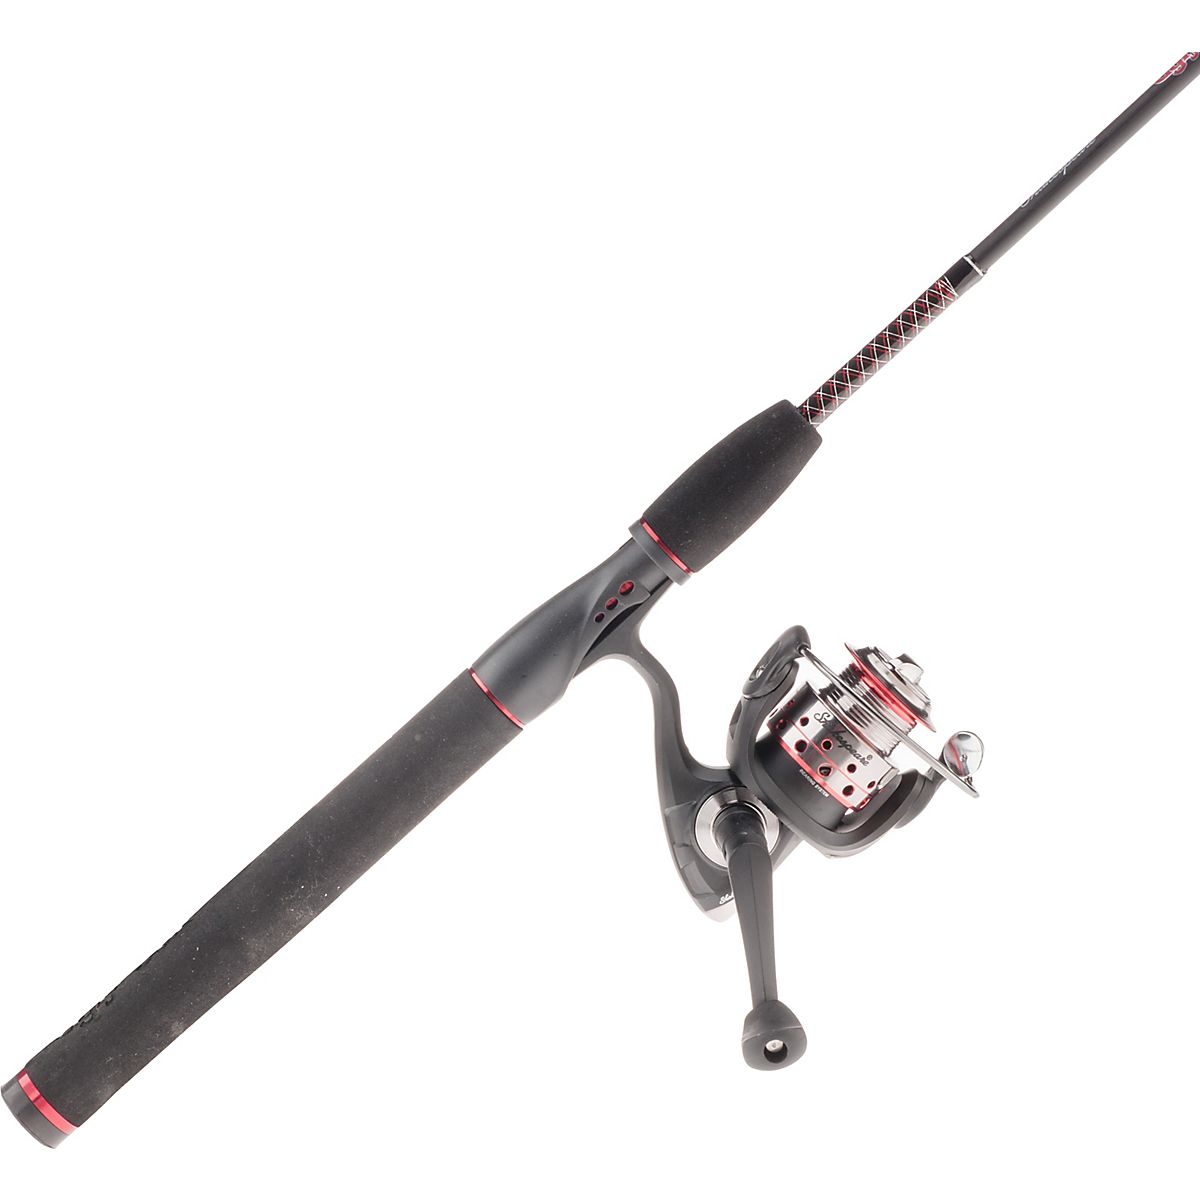  Ugly Stik 5'6” GX2 Spincast Youth Fishing Rod and Reel  Spinning Combo, 2 Piece Rod, Size 30 Reel, Right/Left Hand Position :  Spinning Rod And Reel Combos : Sports & Outdoors